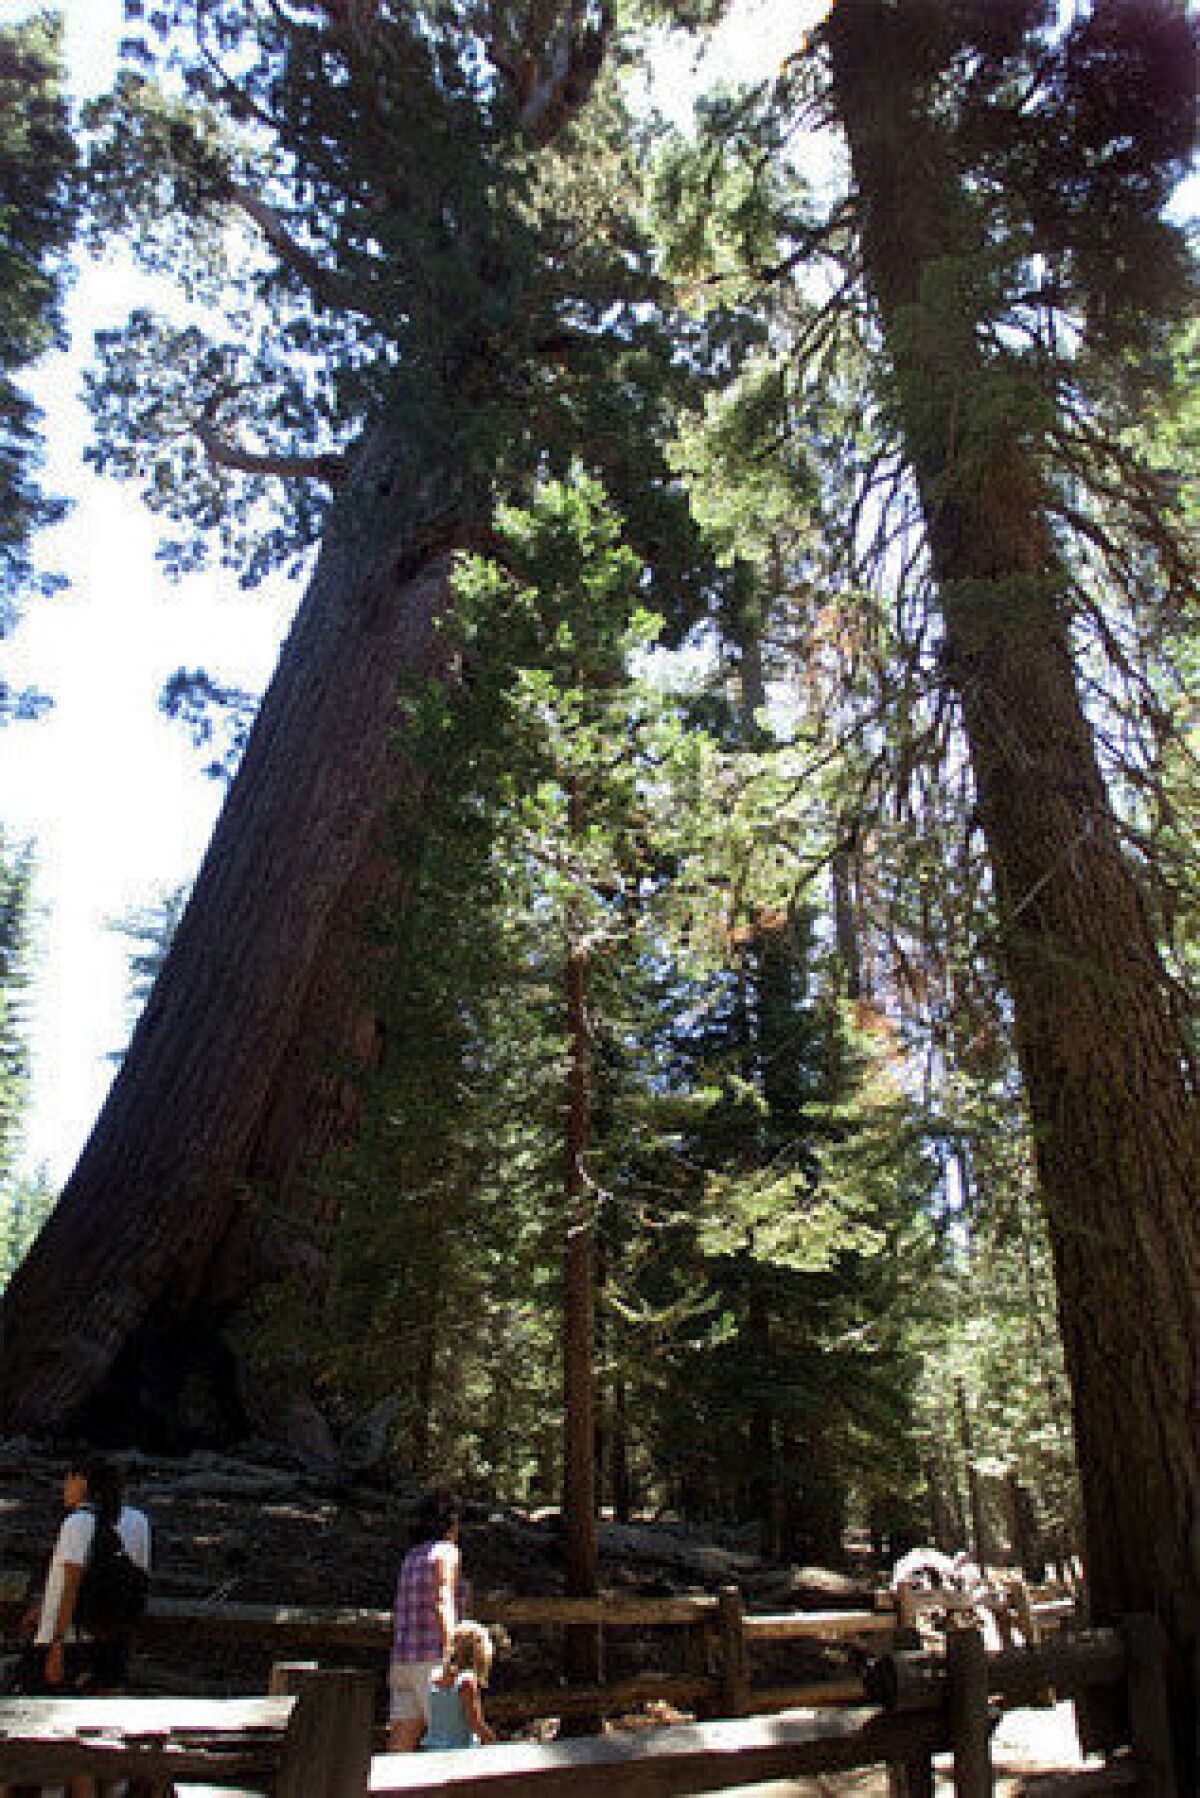 The Grizzly Giant tree(left)in Mariposa Grove in Yosemite National Park. The National Park Service is planning to remove most development in the grove of giant sequoias as part of a $24 million restoration project.